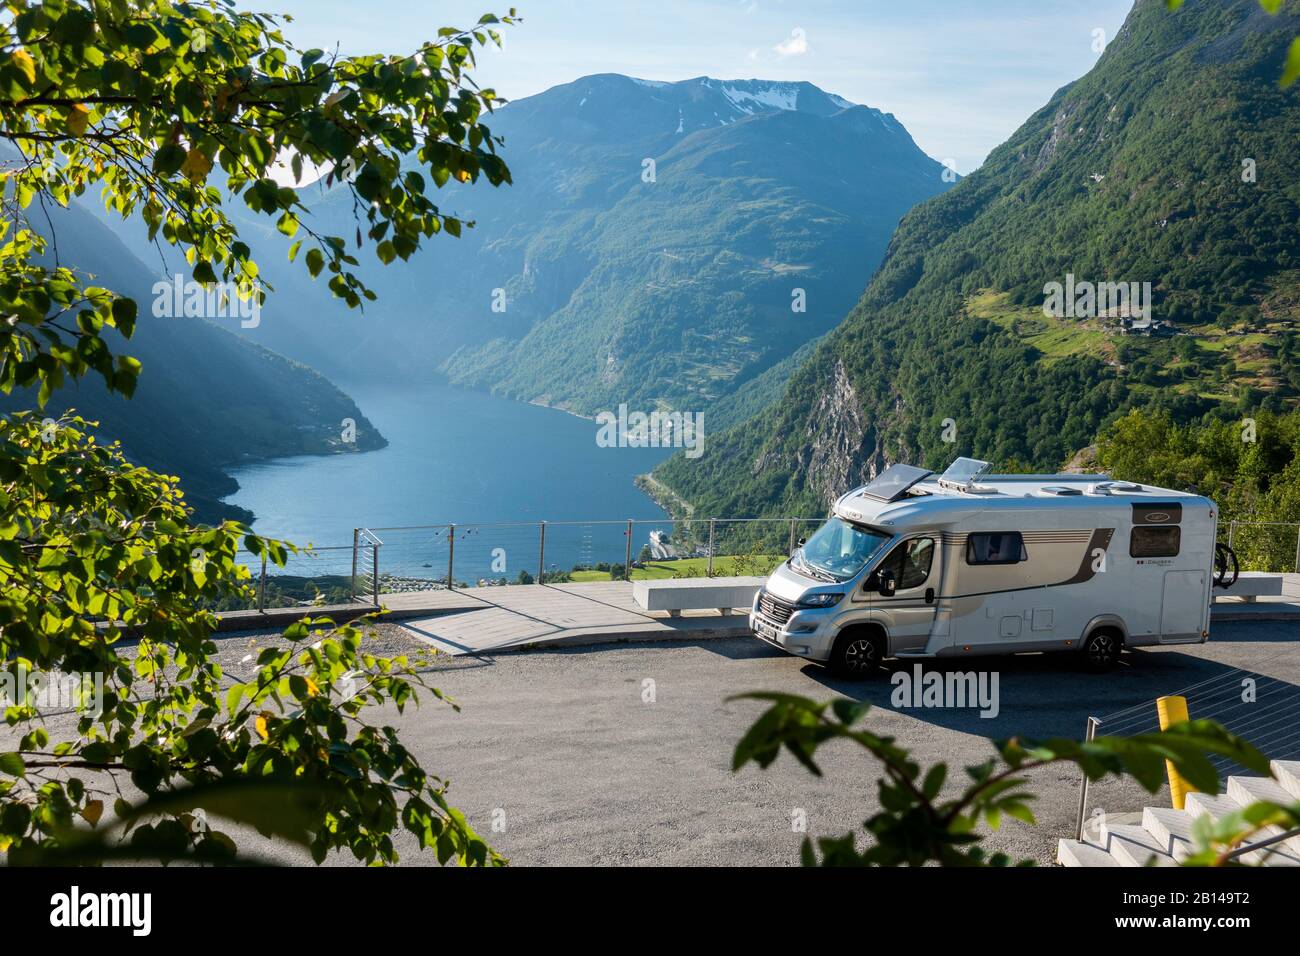 Mobile home, parking lot, Geiranger fjord Norway Stock Photo